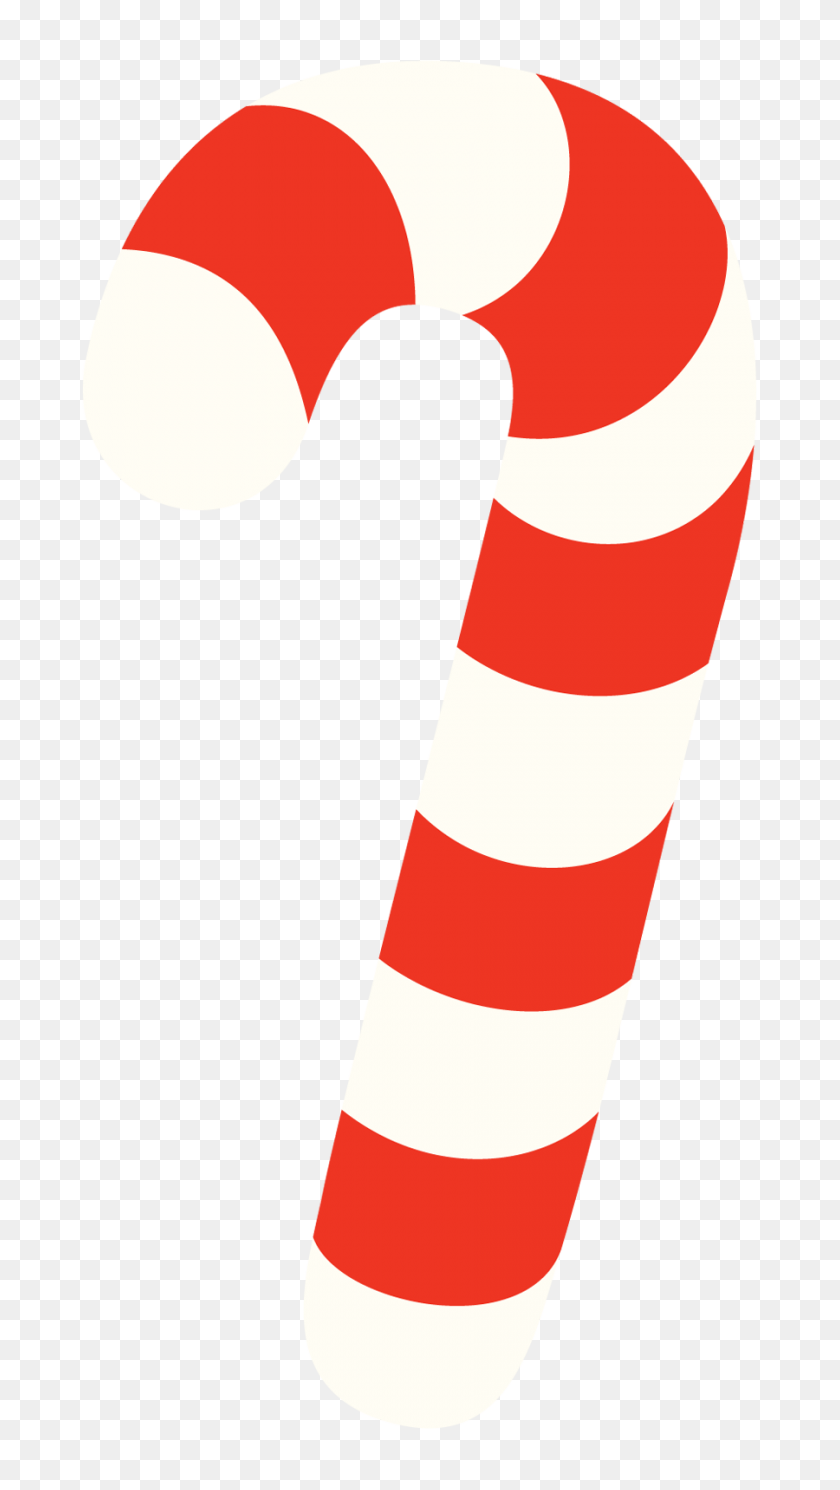 900x1650 Candy Cane Free To Use Clip Art - Gingerbread House Clipart Free